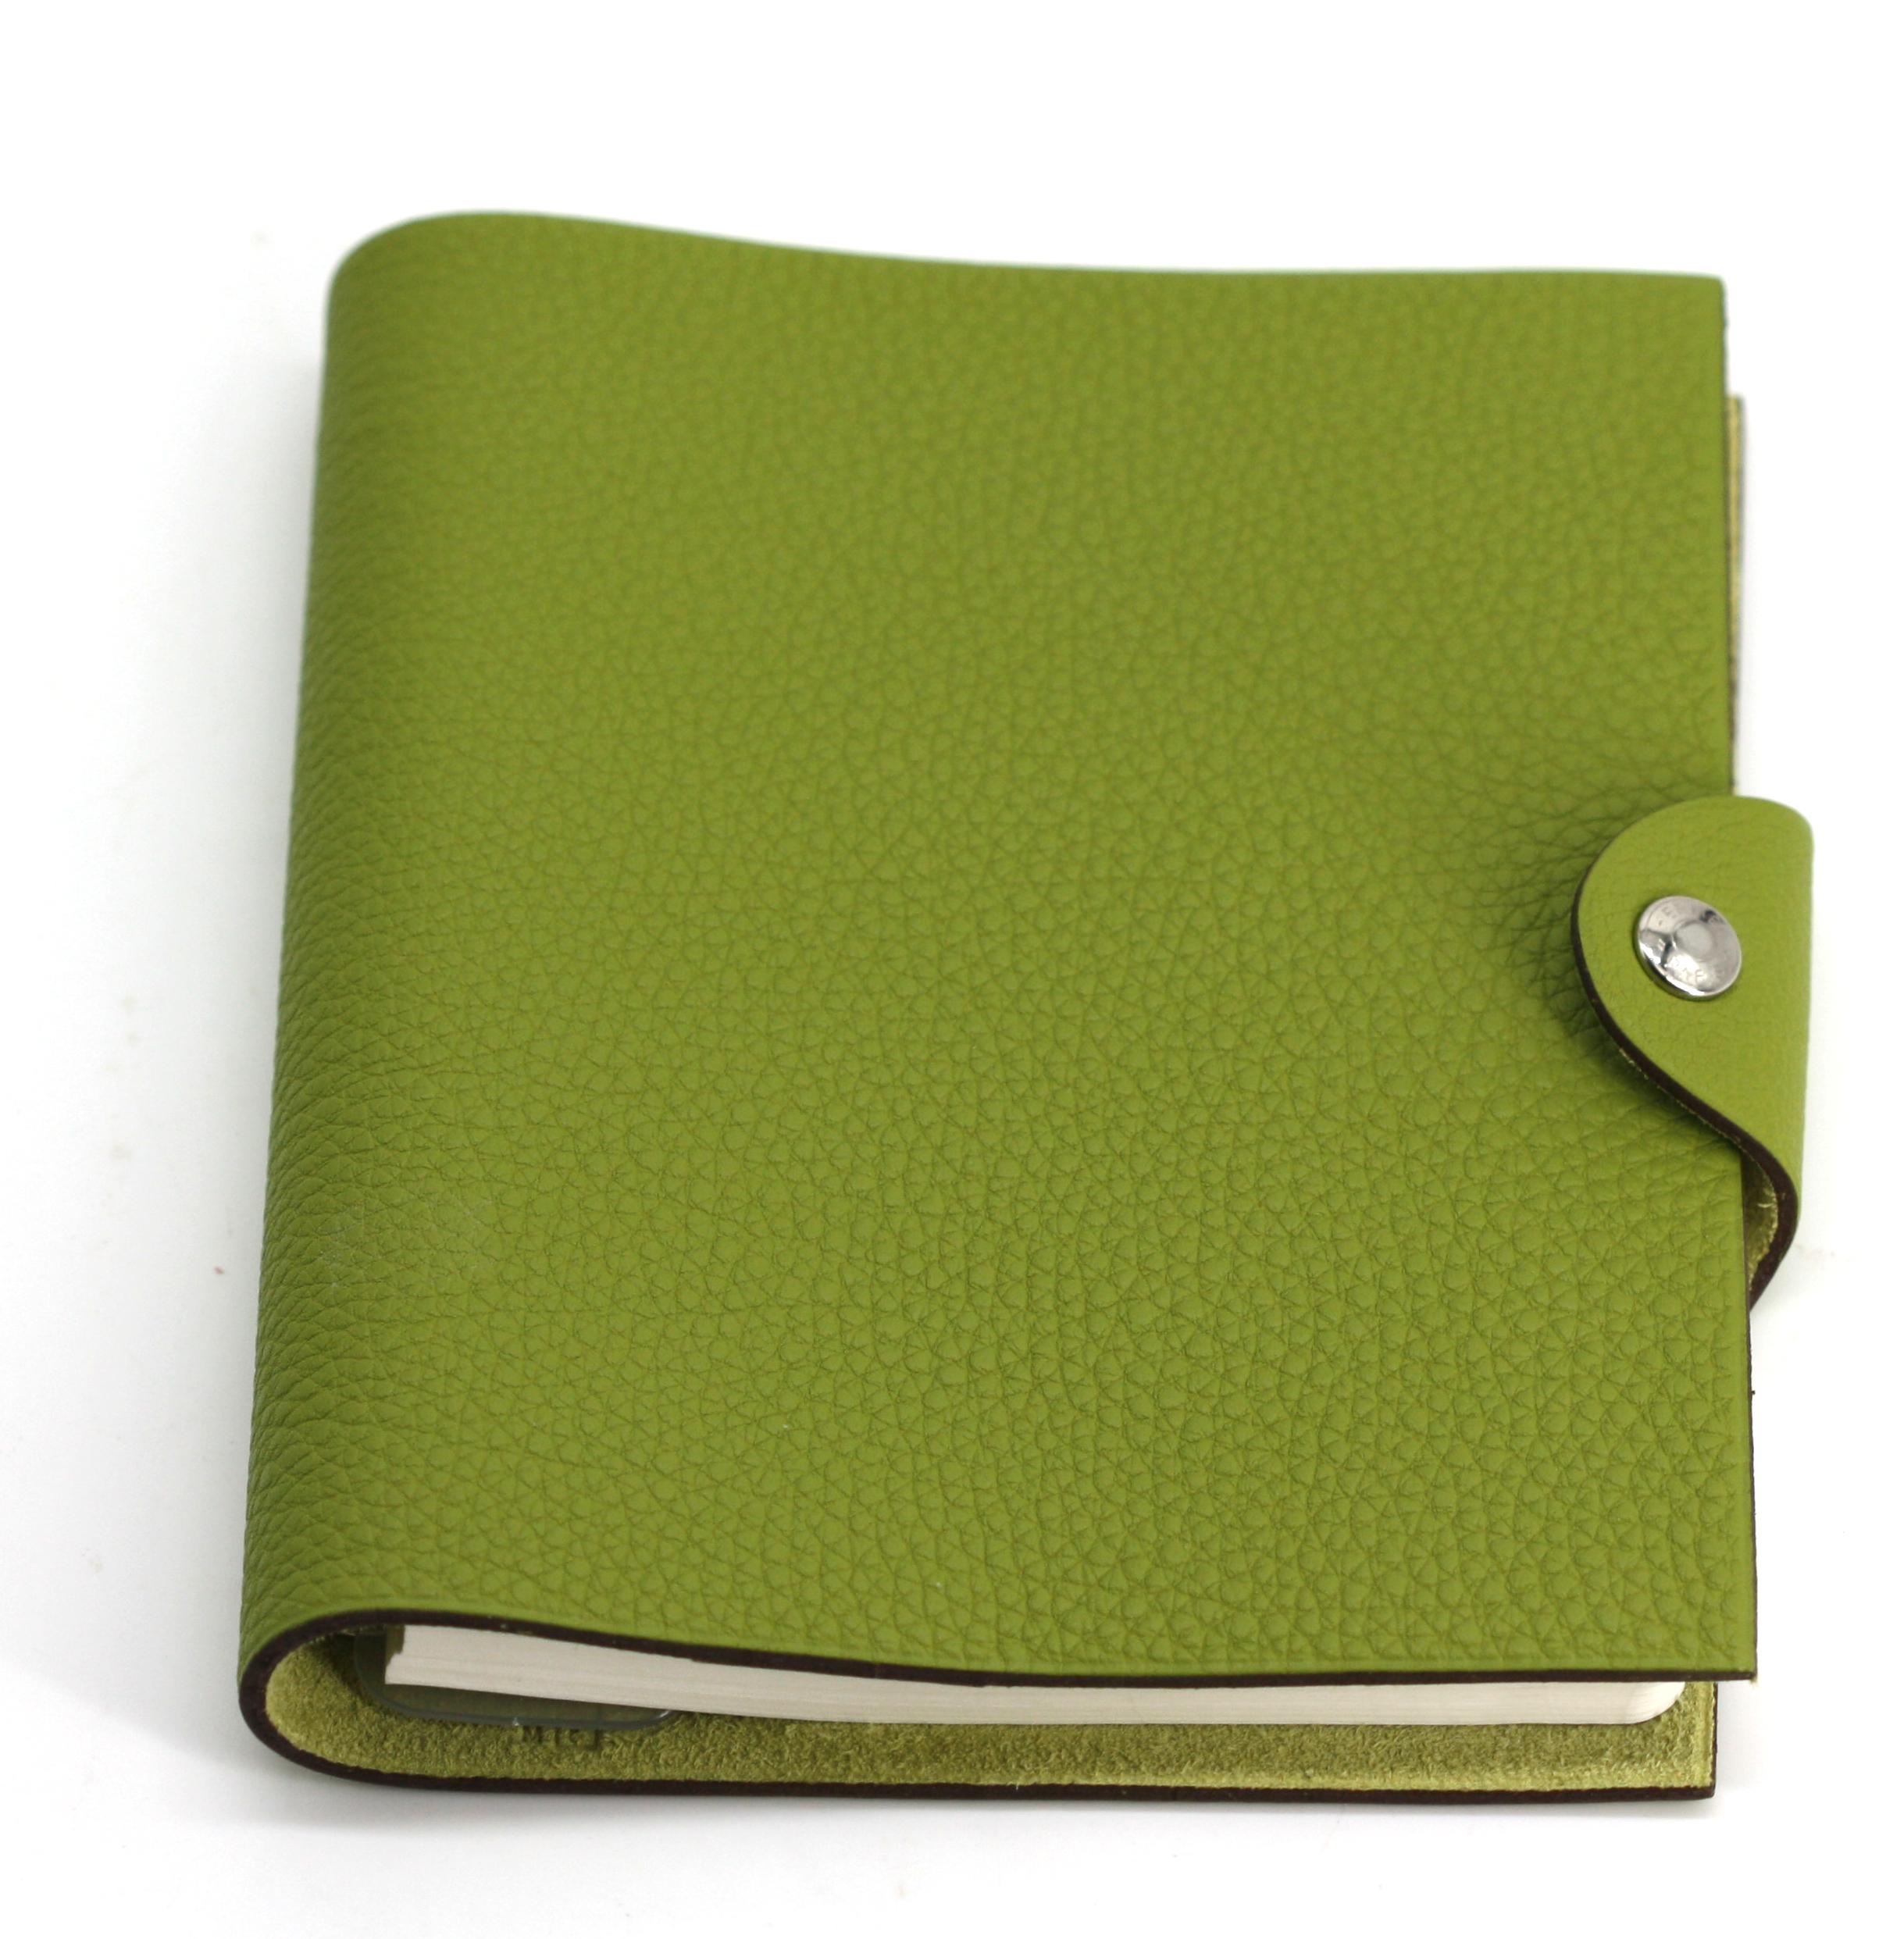 Hermes Anis/Kiwi Green Togo Leather Notebook Cover, with Spiral inset, 2009 In Good Condition For Sale In West Palm Beach, FL